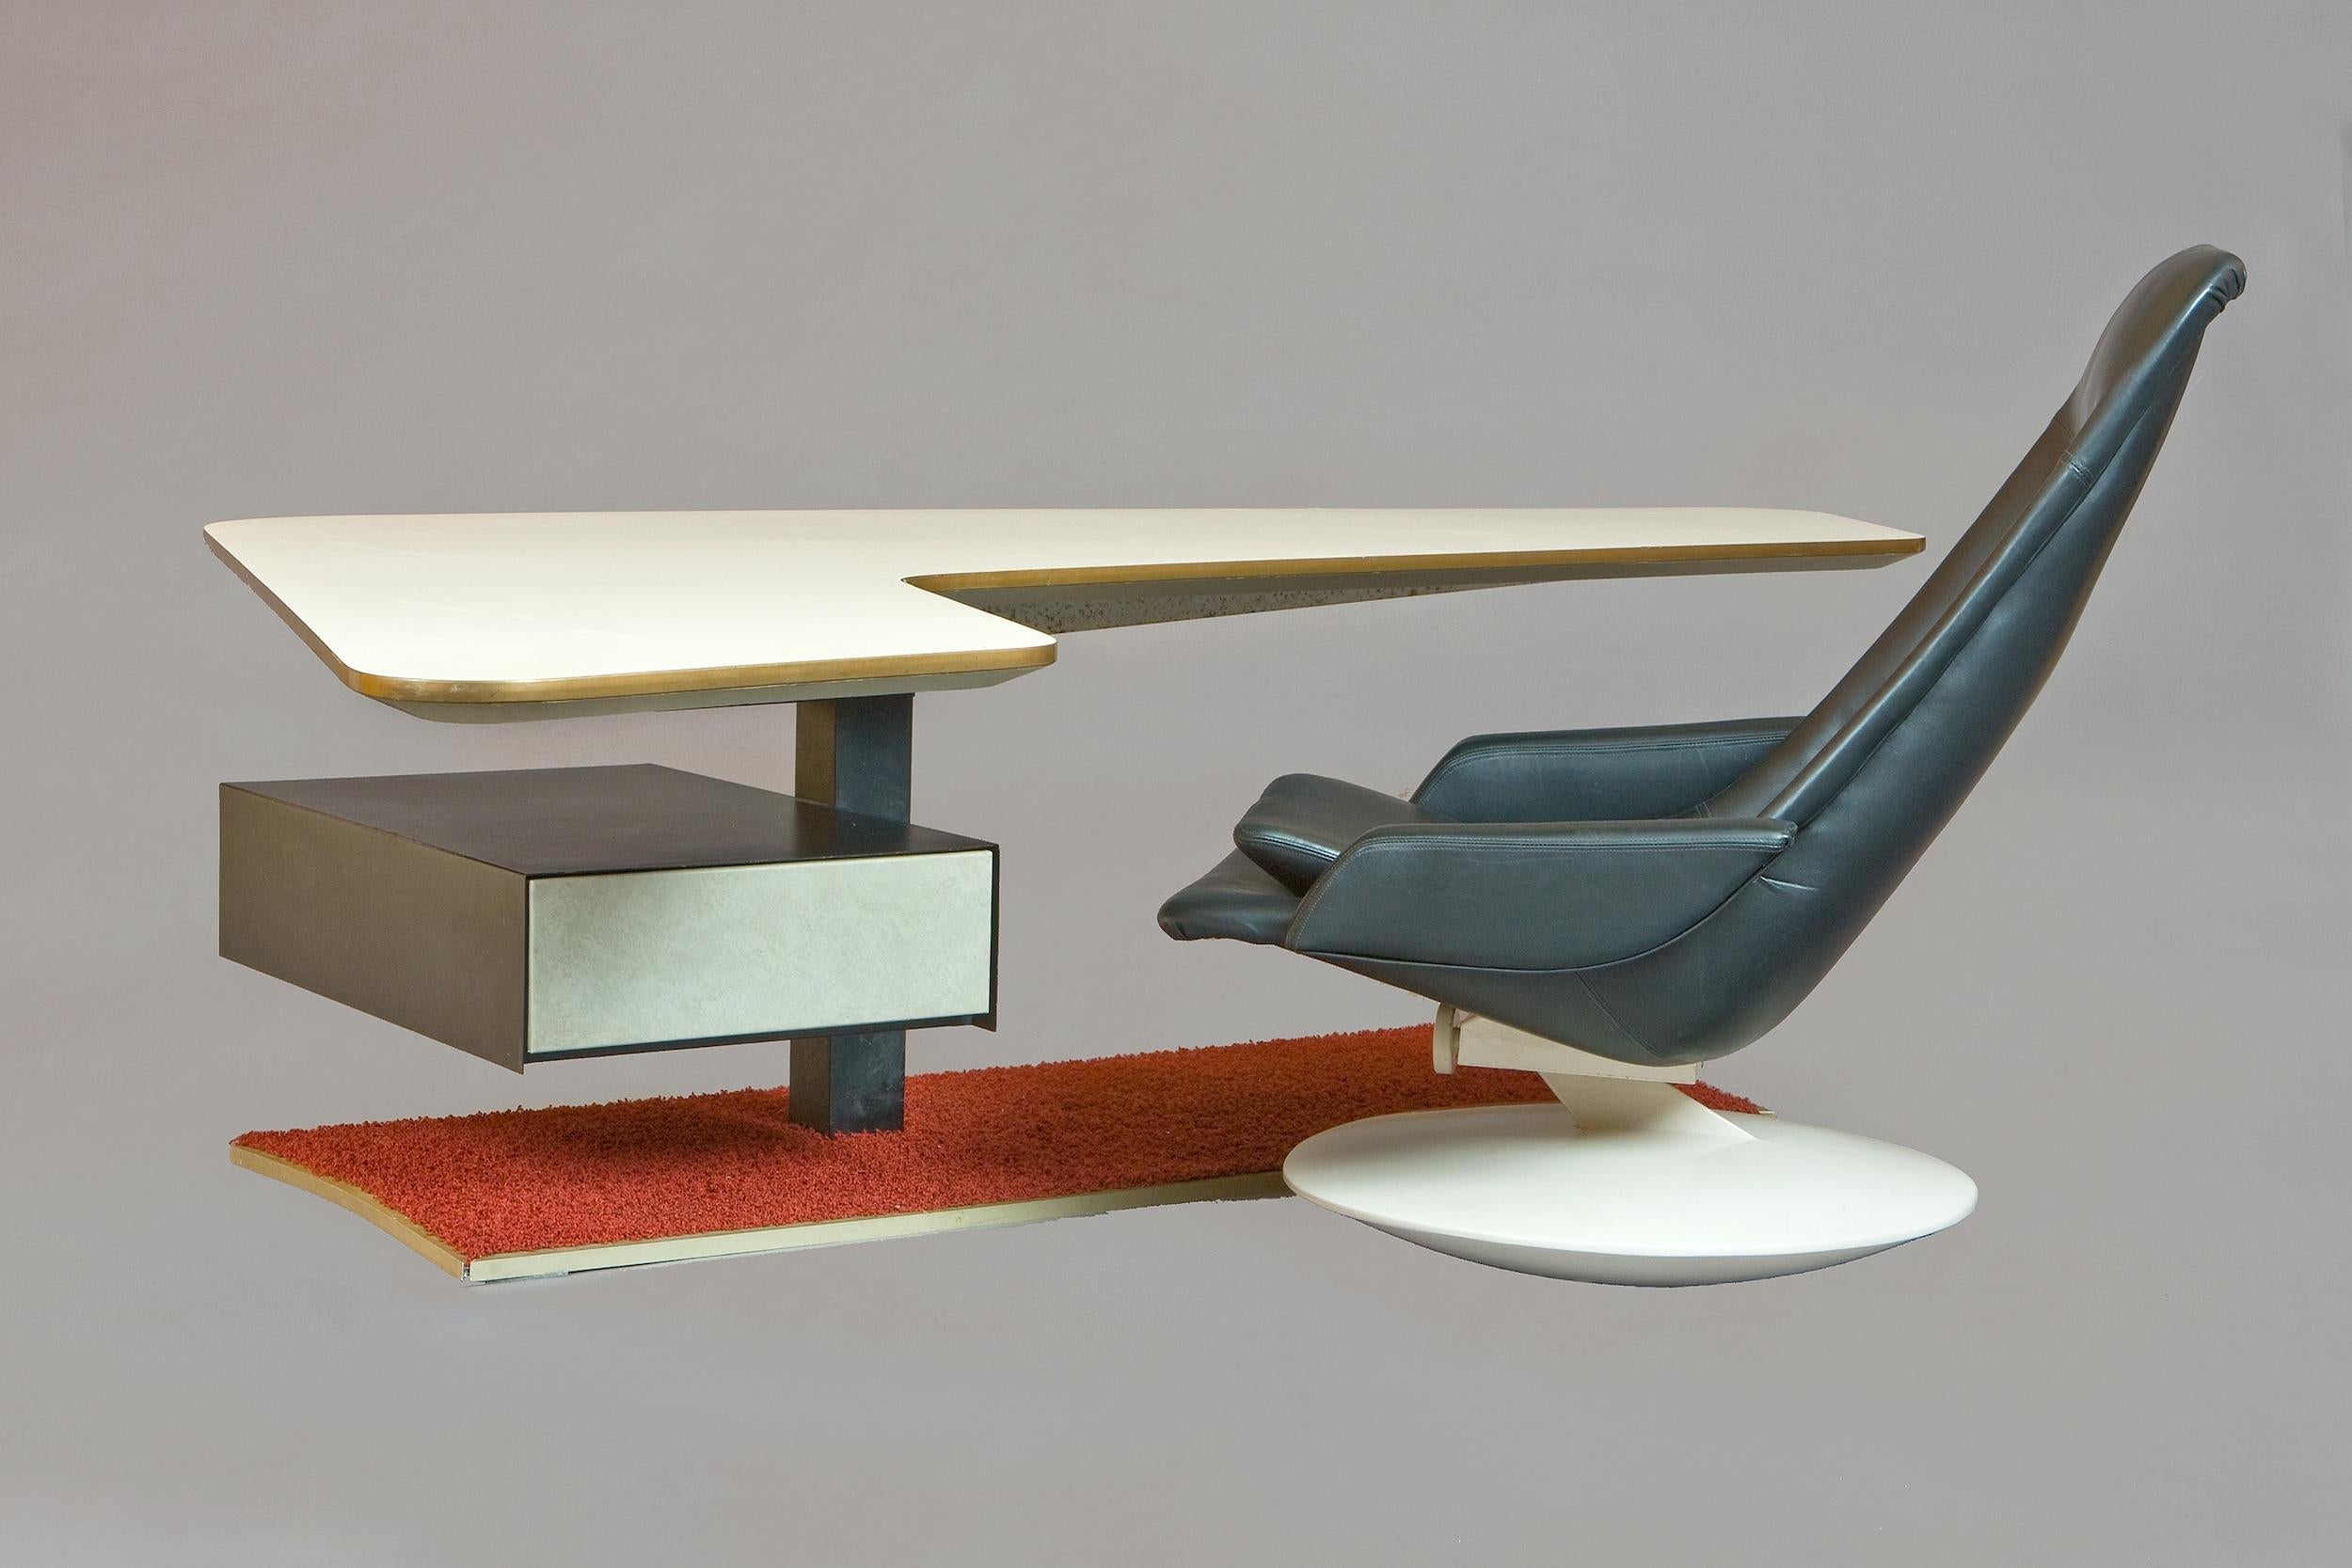 France, 1970's

A phenomenal Space Age boomerang desk. A beautifully elongated and angled Formica top cantilevers over a steel column with a spring-loaded compartmentalized drawer, raised on a cast iron base sheathed in original red shag carpeting.